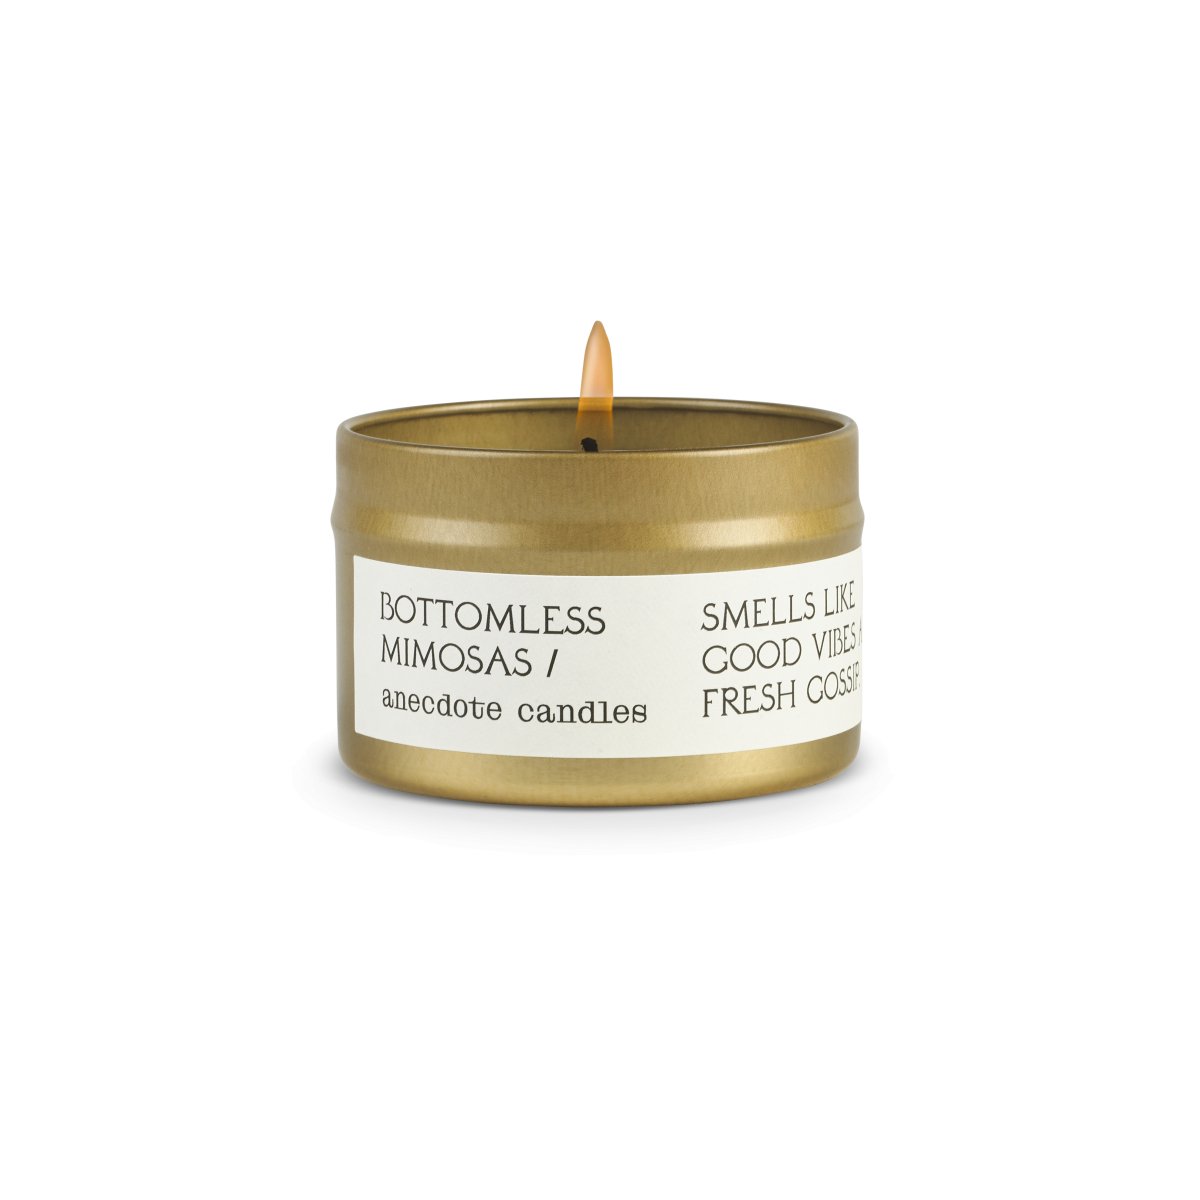 Anecdote Candles Bottomless Mimosas Candle - lily & onyx